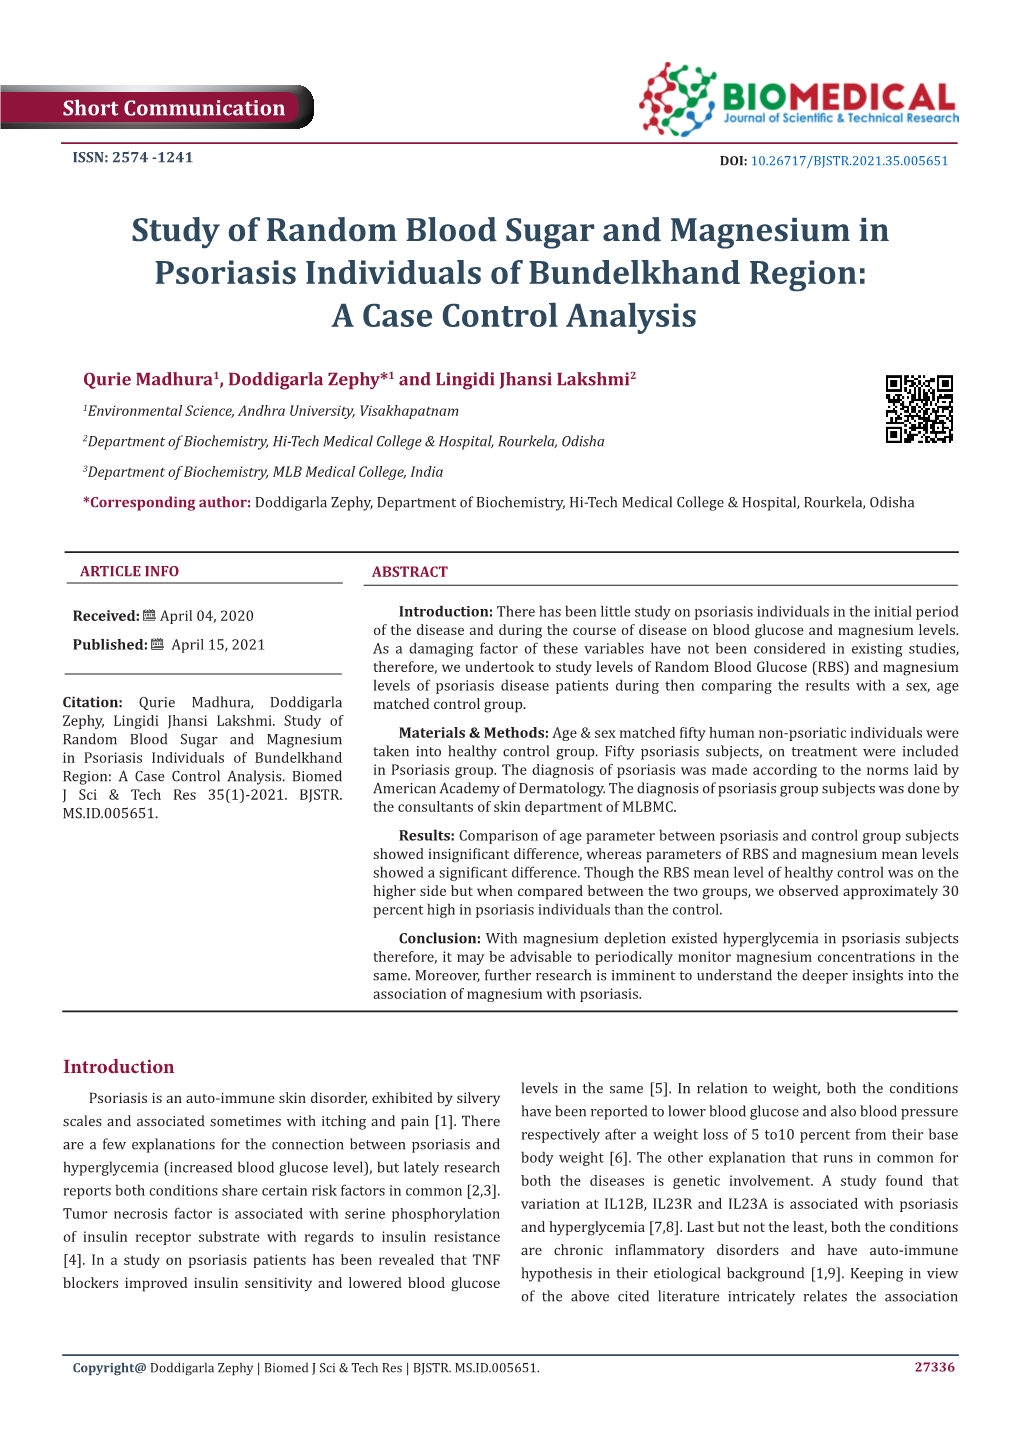 Study of Random Blood Sugar and Magnesium in Psoriasis Individuals of Bundelkhand Region: a Case Control Analysis